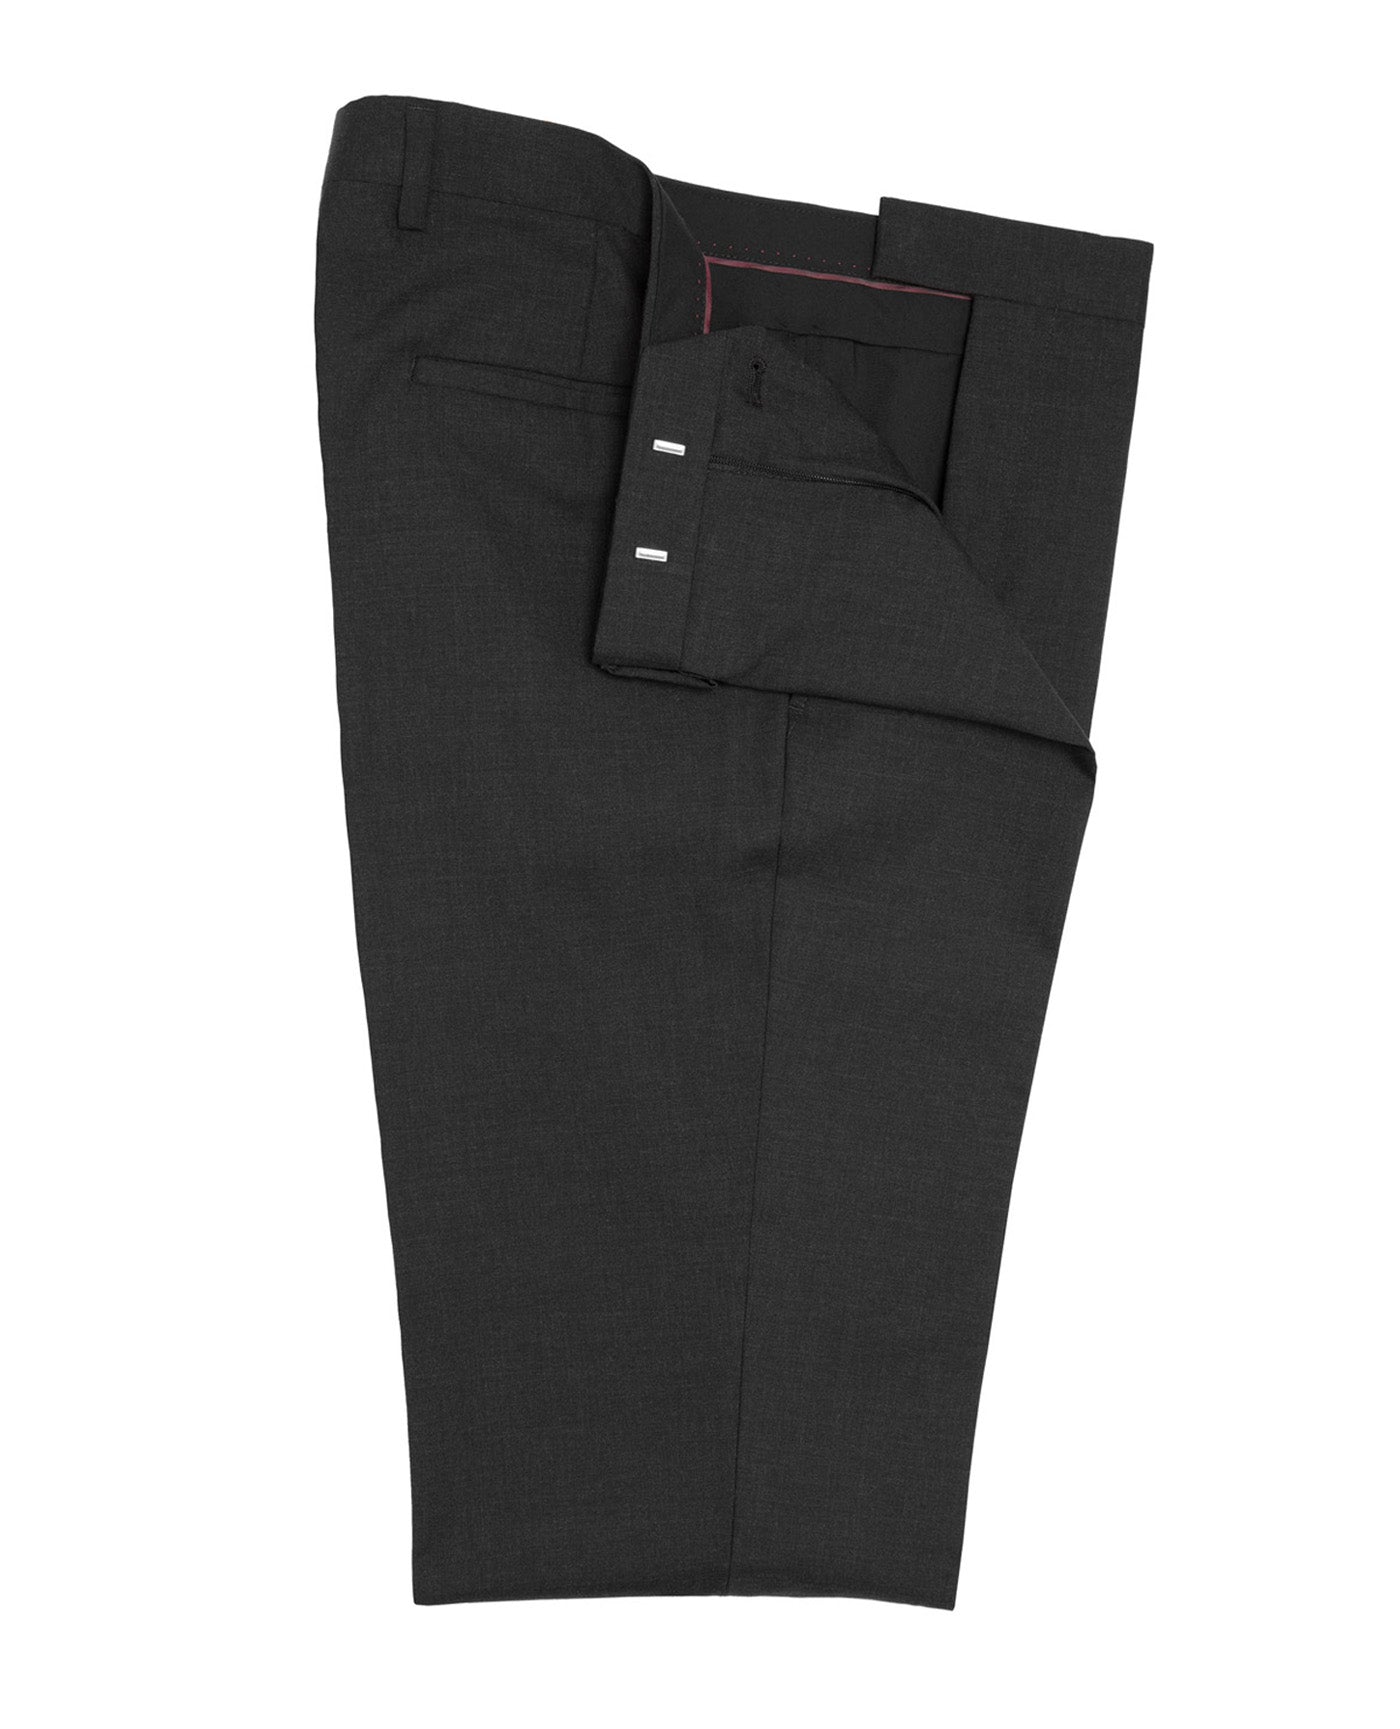 Image 1 of Flat Front Hoxton Trousers Plain Weave Charcoal Grey